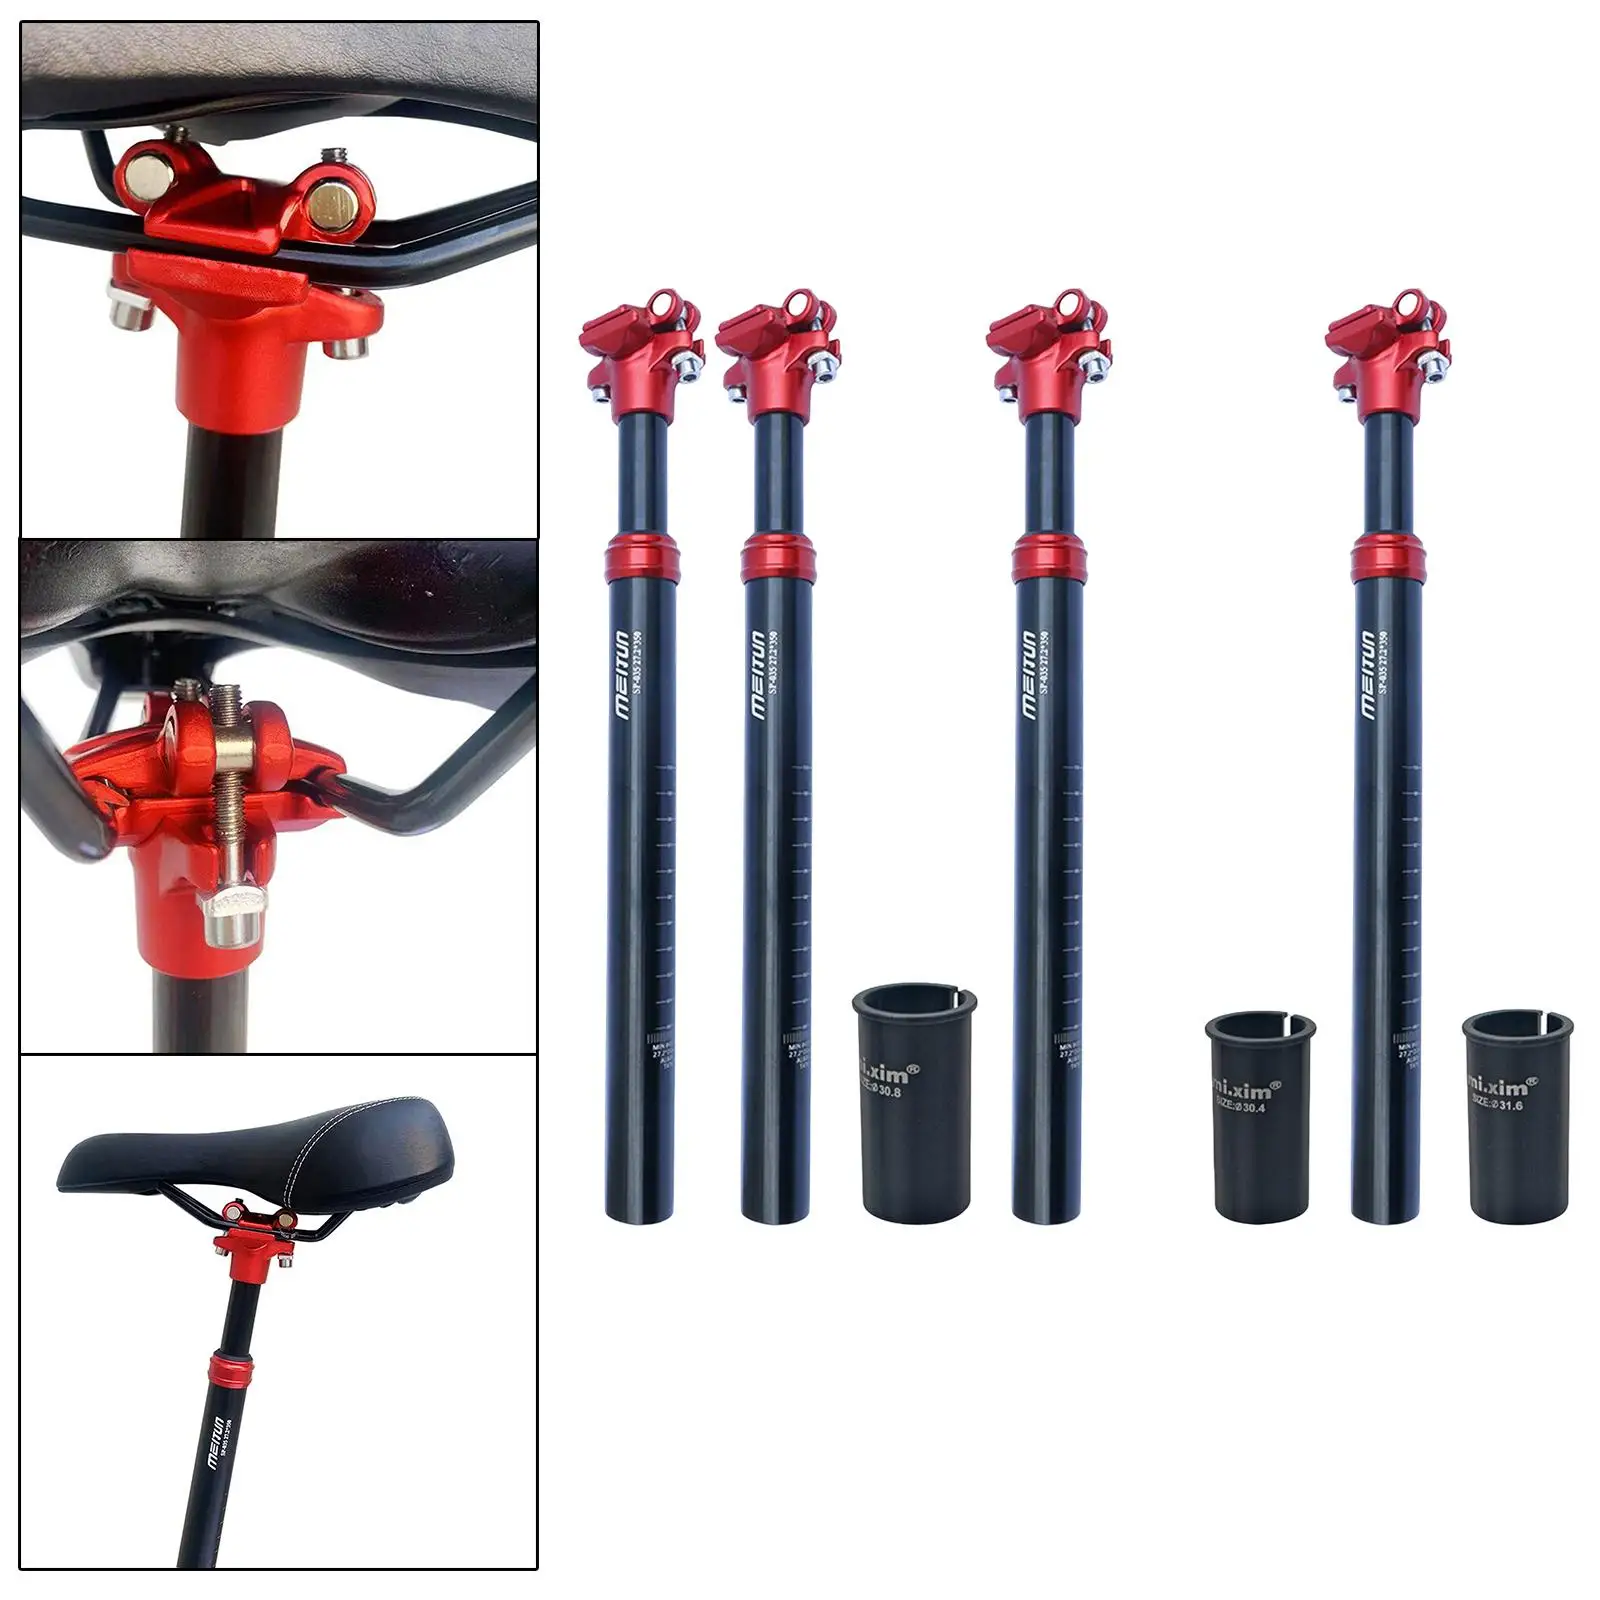 Aluminum Alloy Bike Seat Post, Saddle Support Pole, Cycling Components Shock